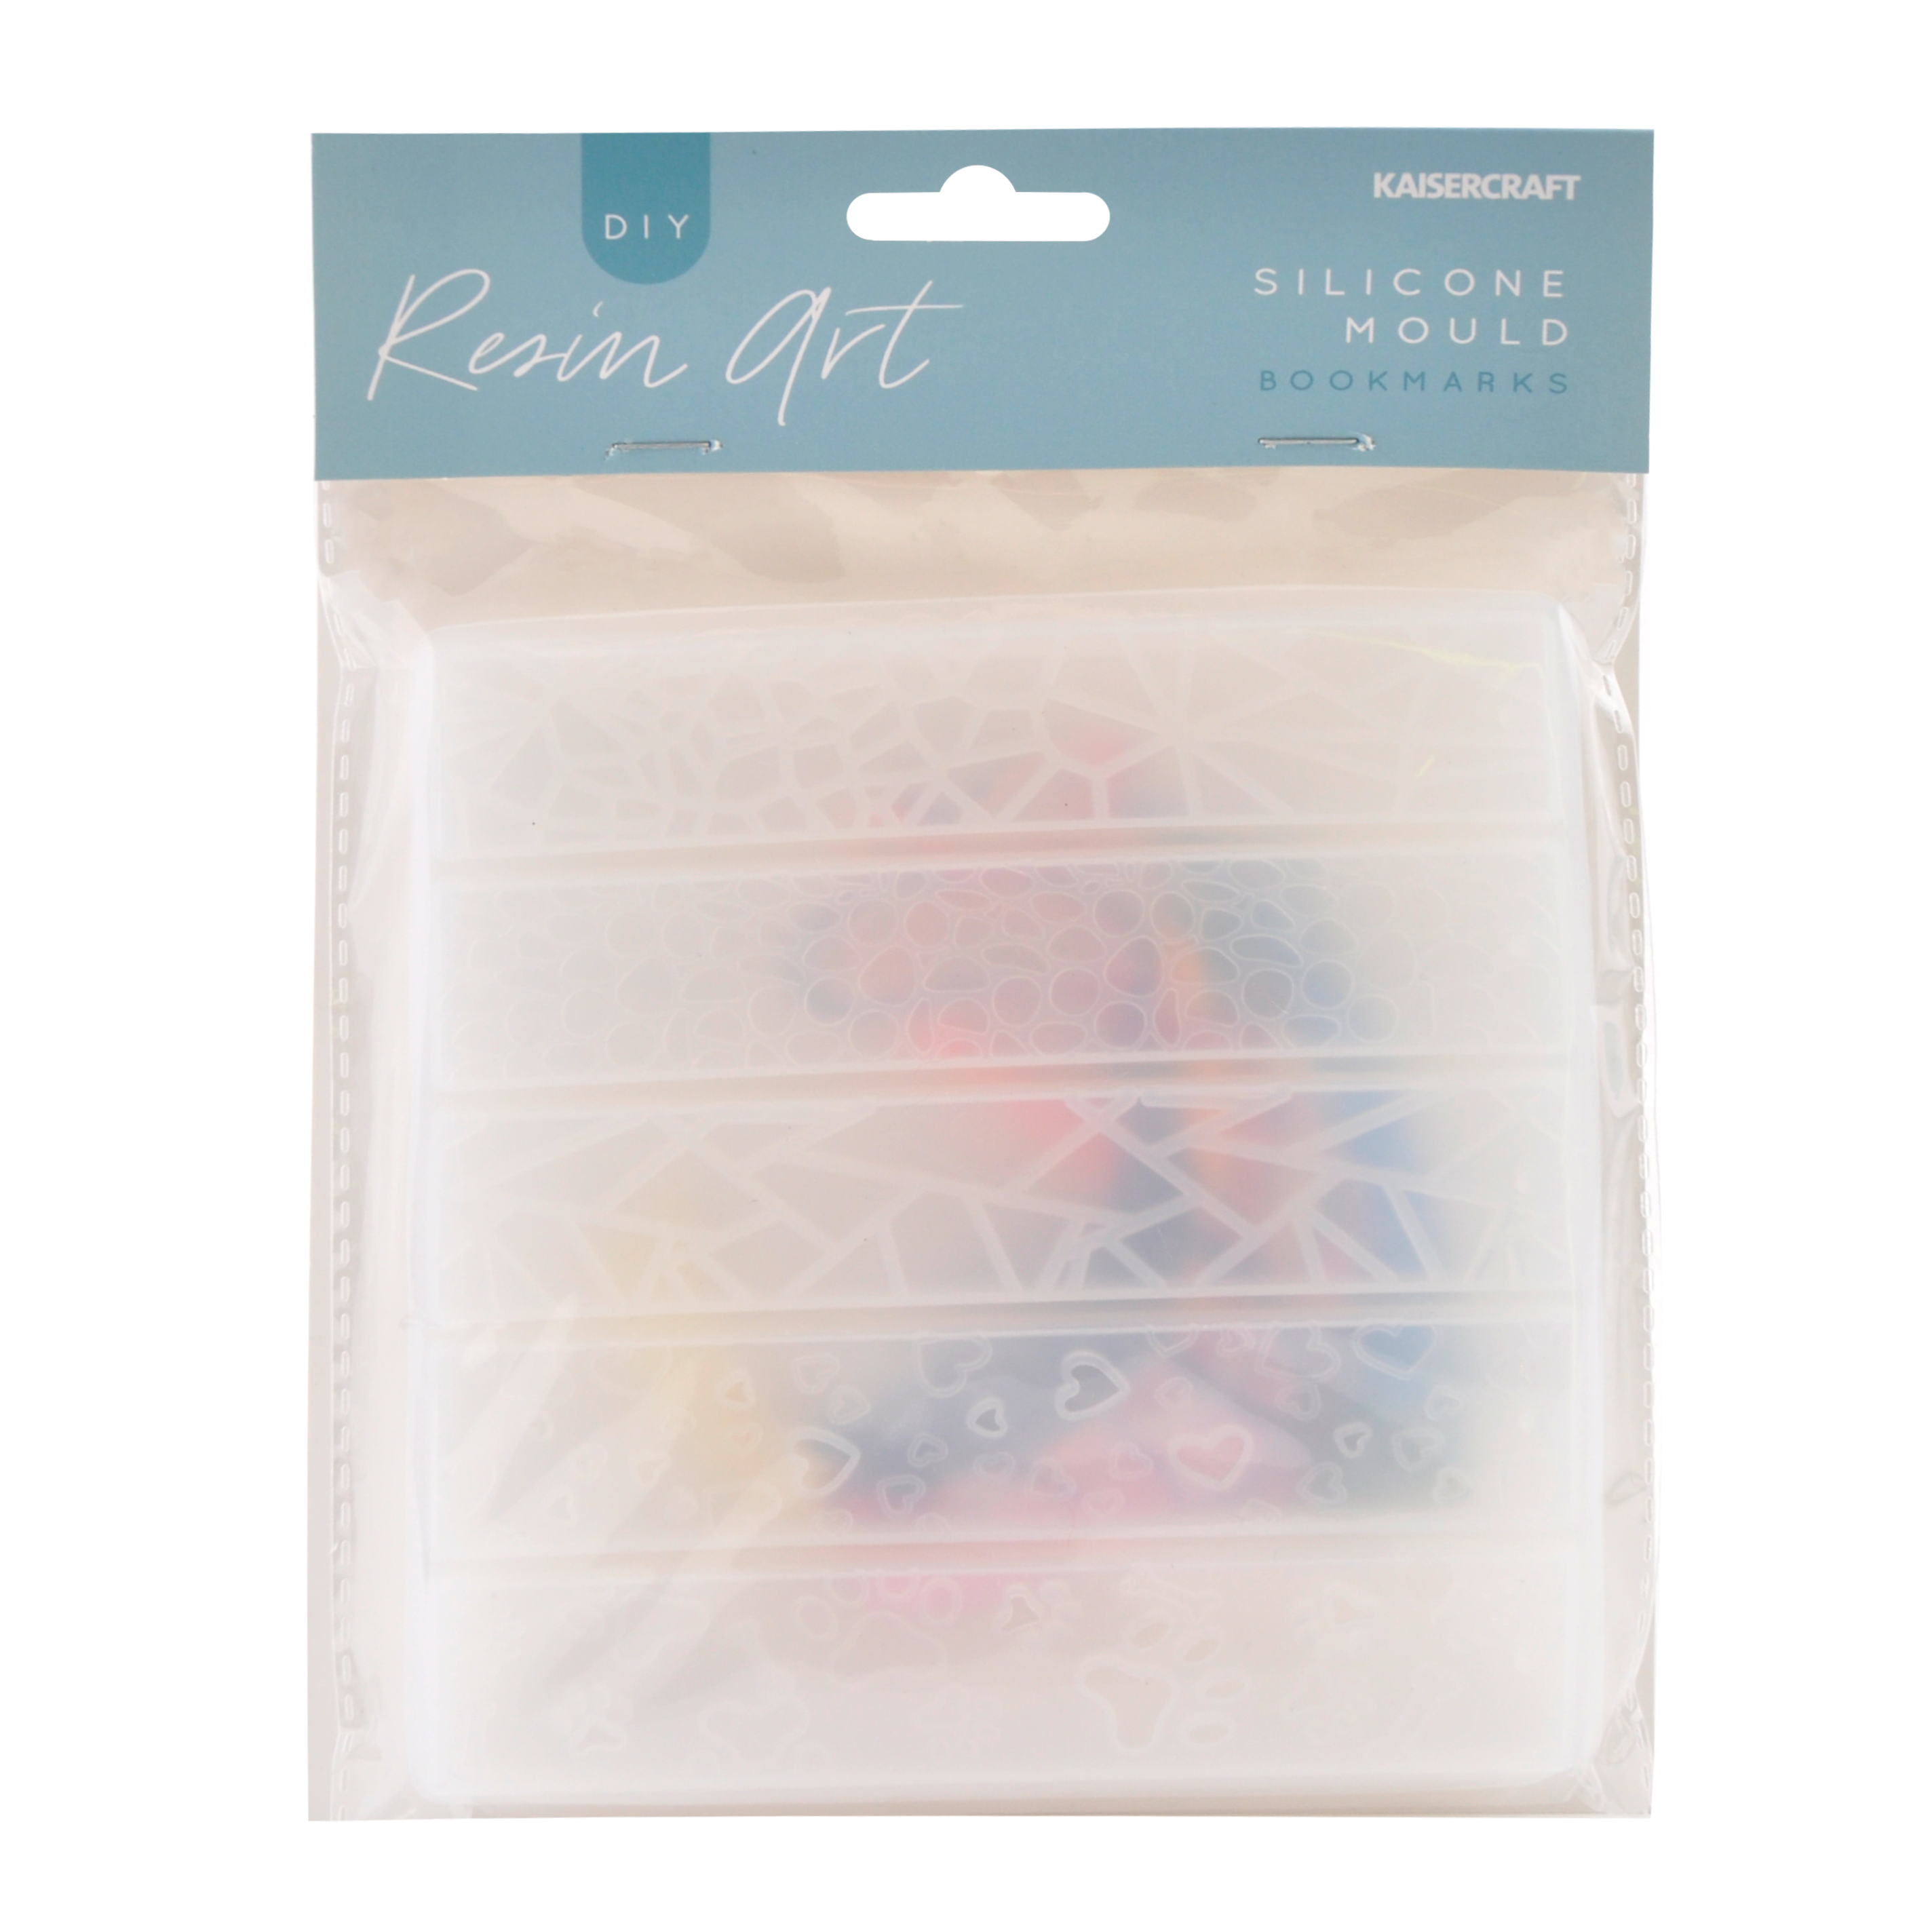 Kaisercraft Resin Silicone Mould - Bookmarks